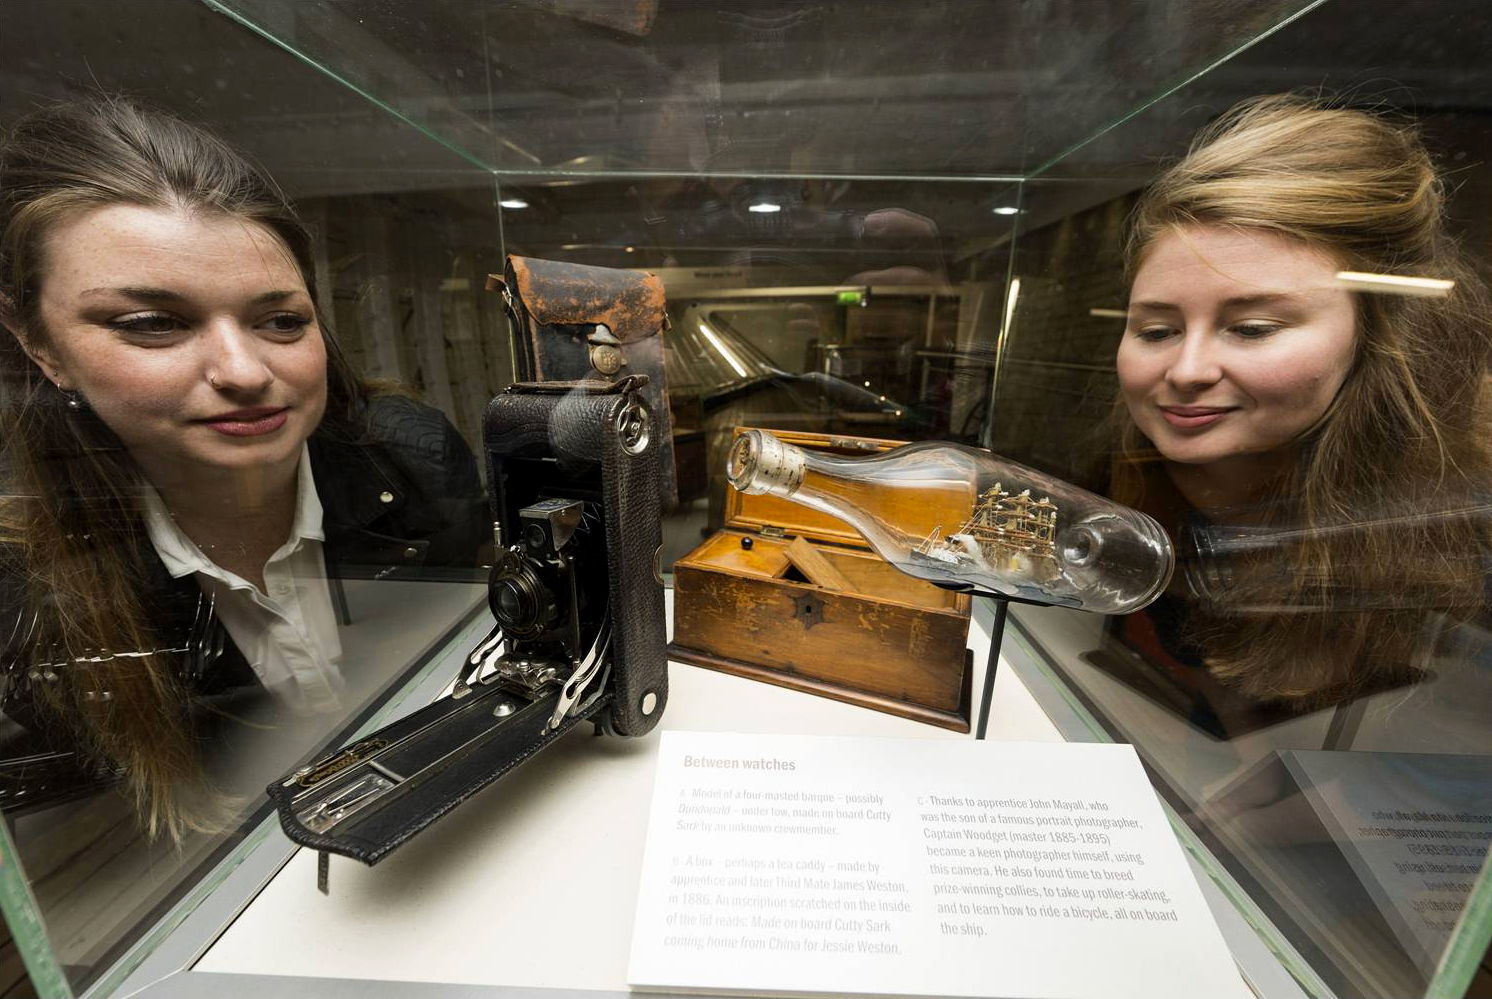 Conservators Liz Ralph and Rachel Morley view artefacts on display inside the Cutty Sark on private tour. Photo by Ray Tang